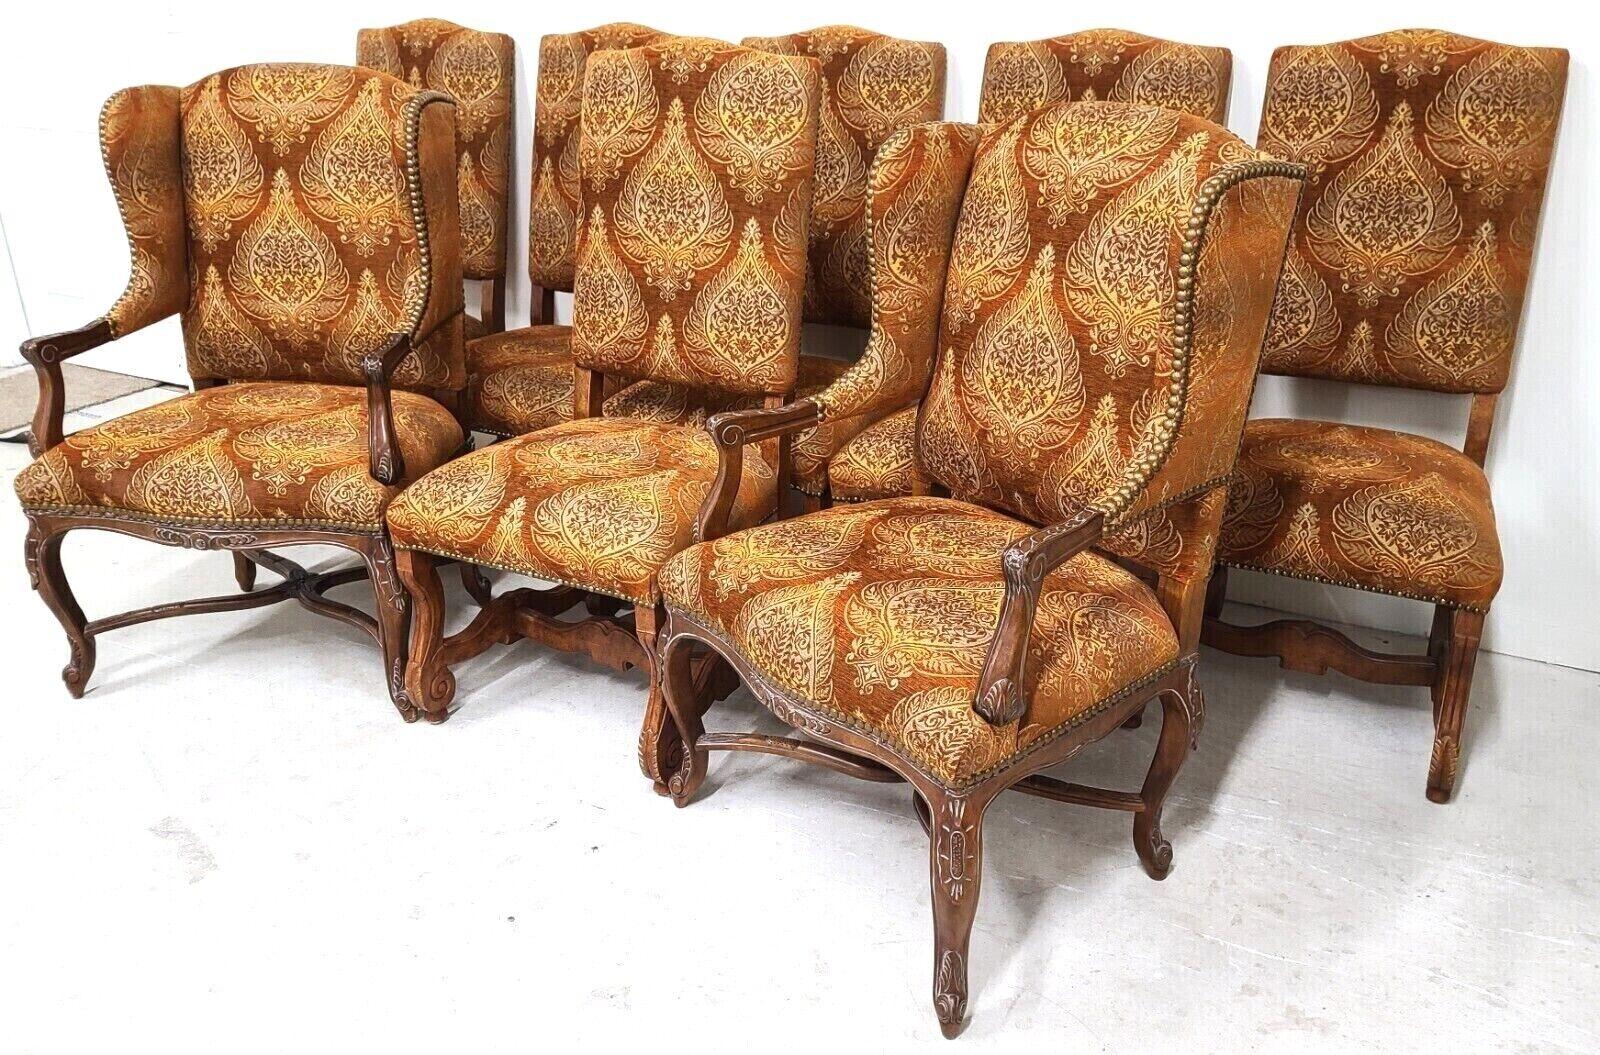 Offering one of our recent palm beach estate fine furniture acquisitions of a 
Set of (8) Os De Mouton wingback dining chairs by Century Furniture
Includes 2 wingback armchairs and 6 side chairs featuring hand-carved features and French nail